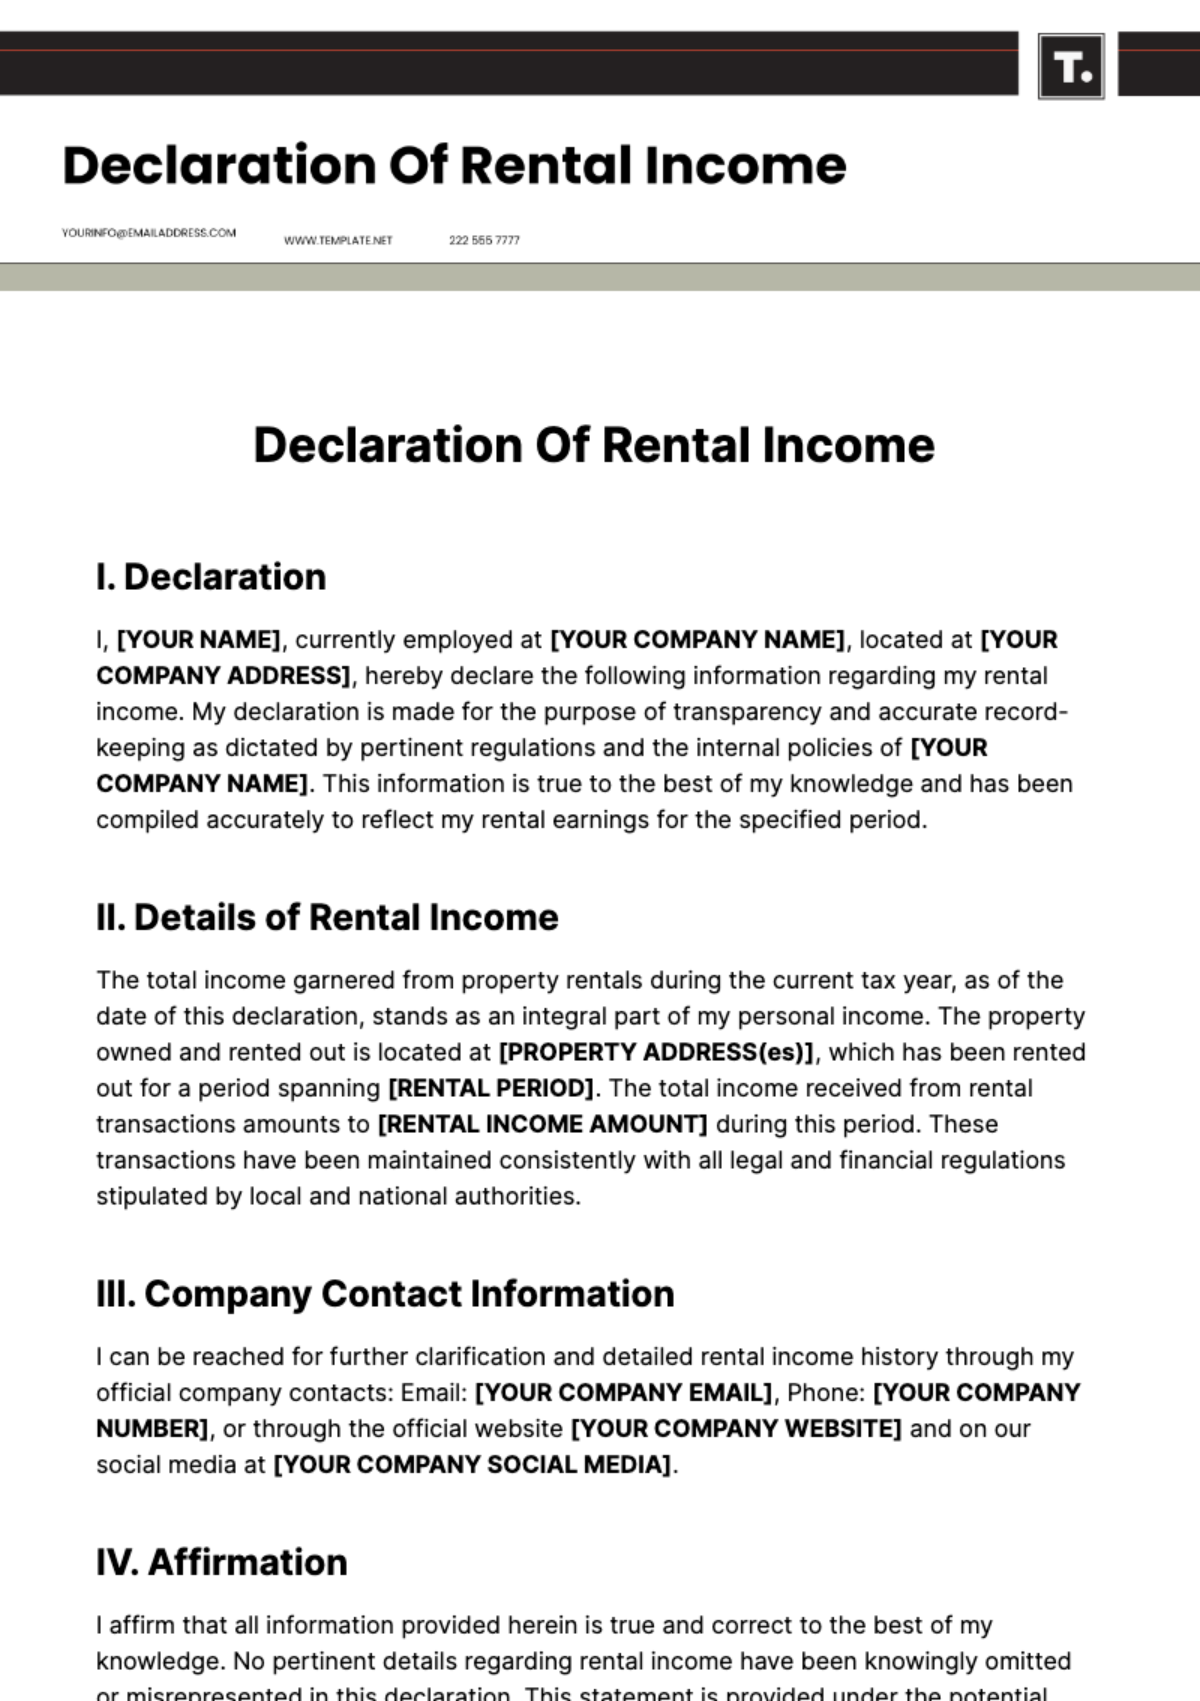 Declaration Of Rental Income Template